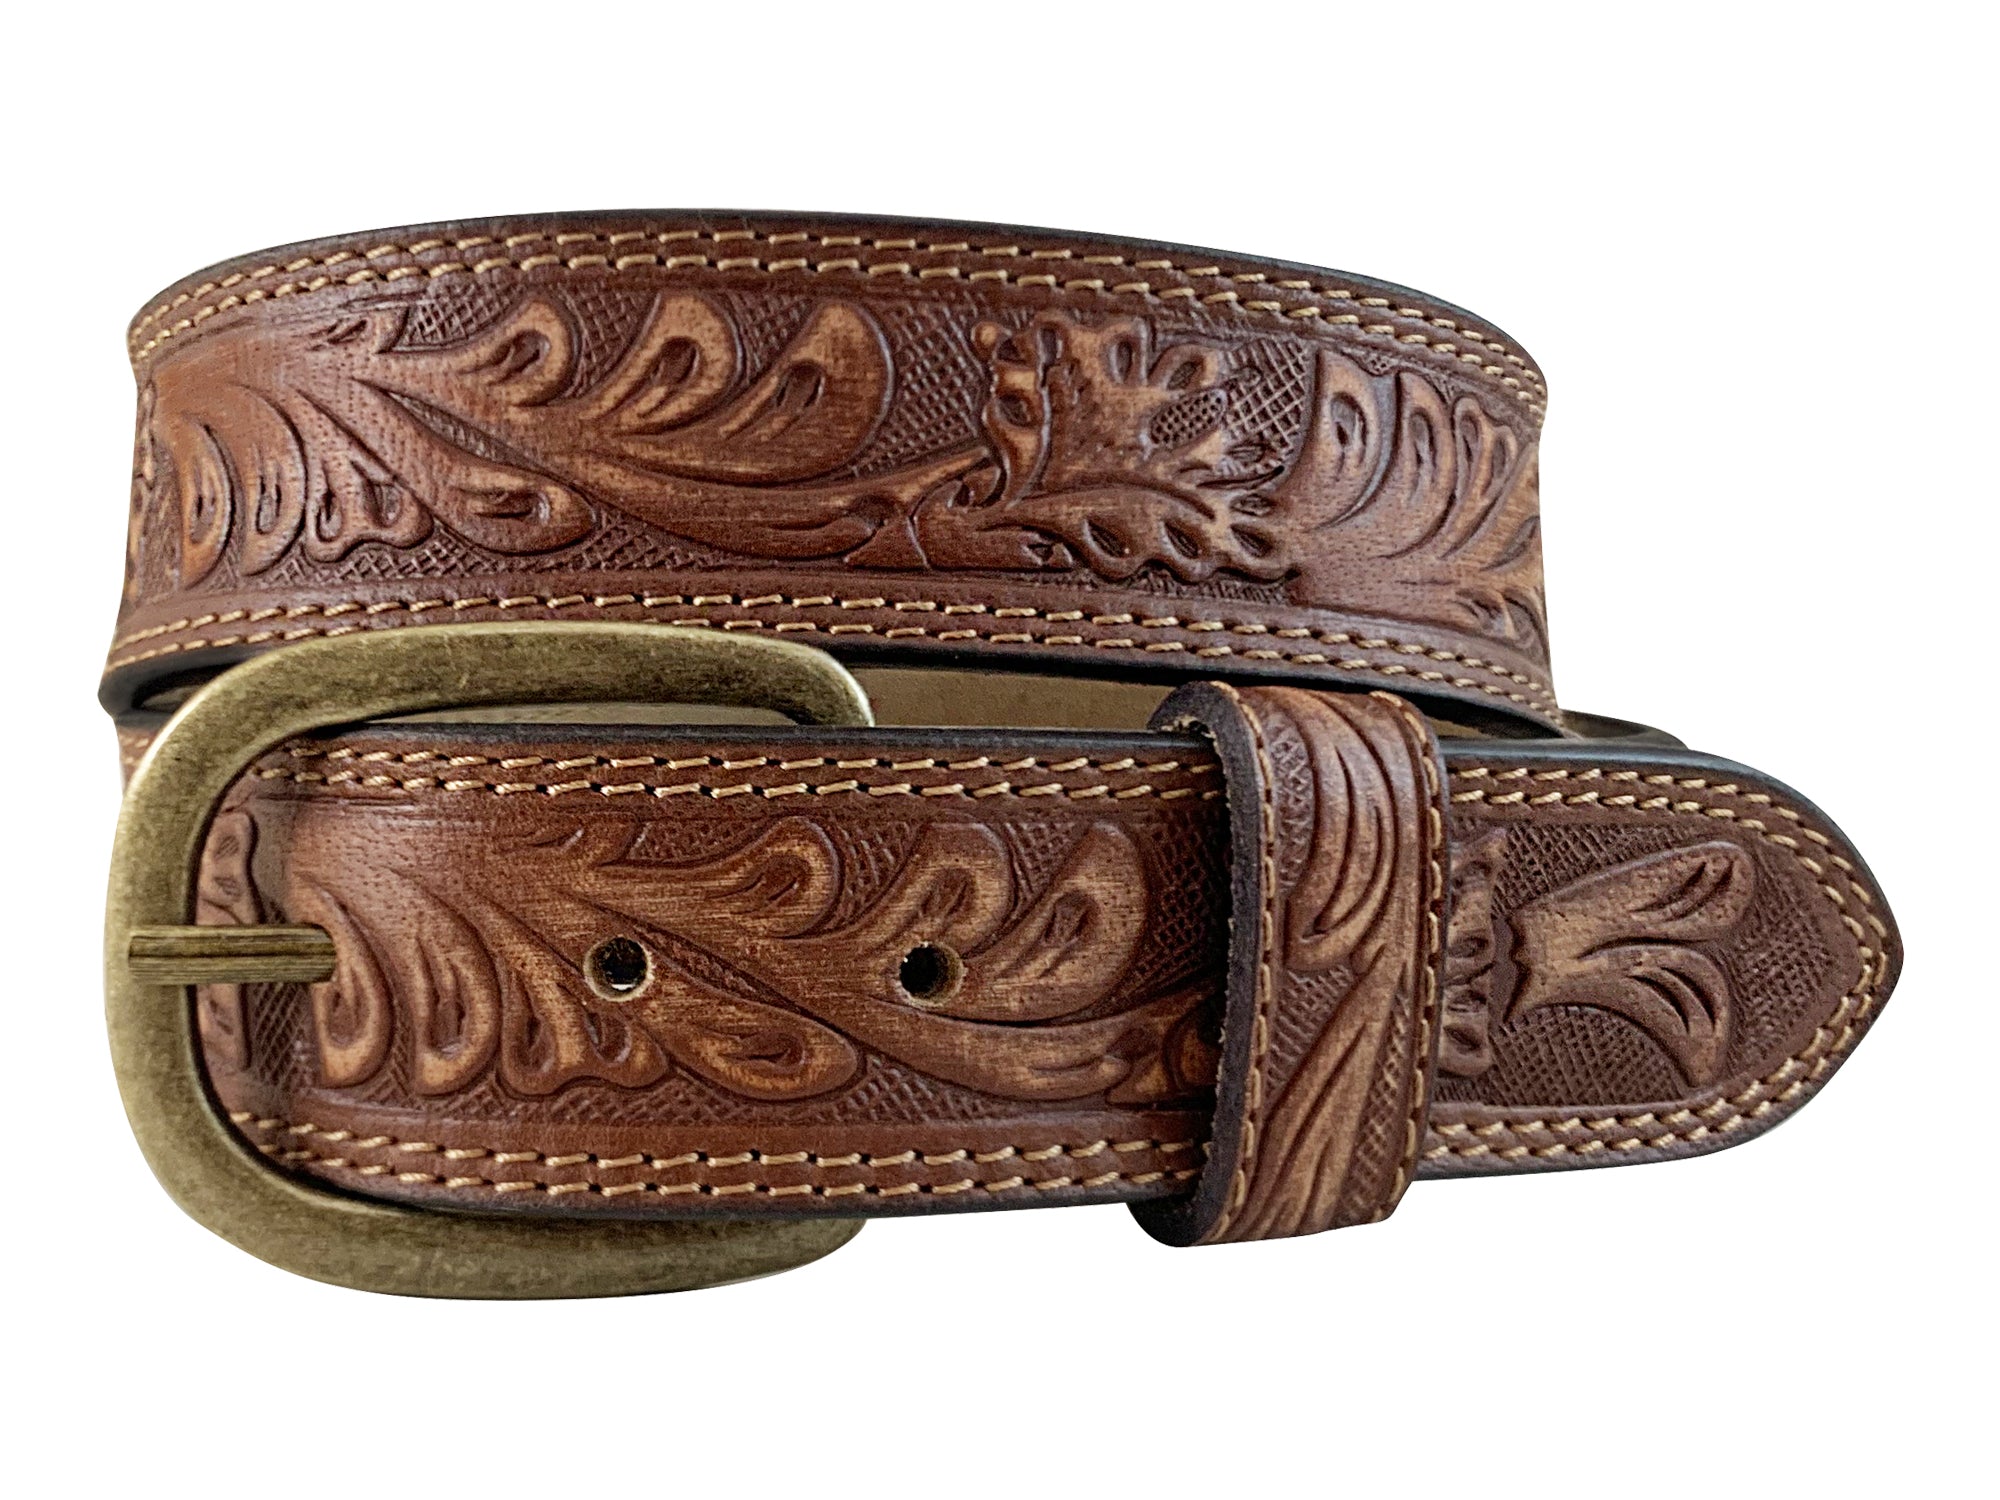 Roper Wms Belt 1.5in Floral Embossed Distressed Leather Tan